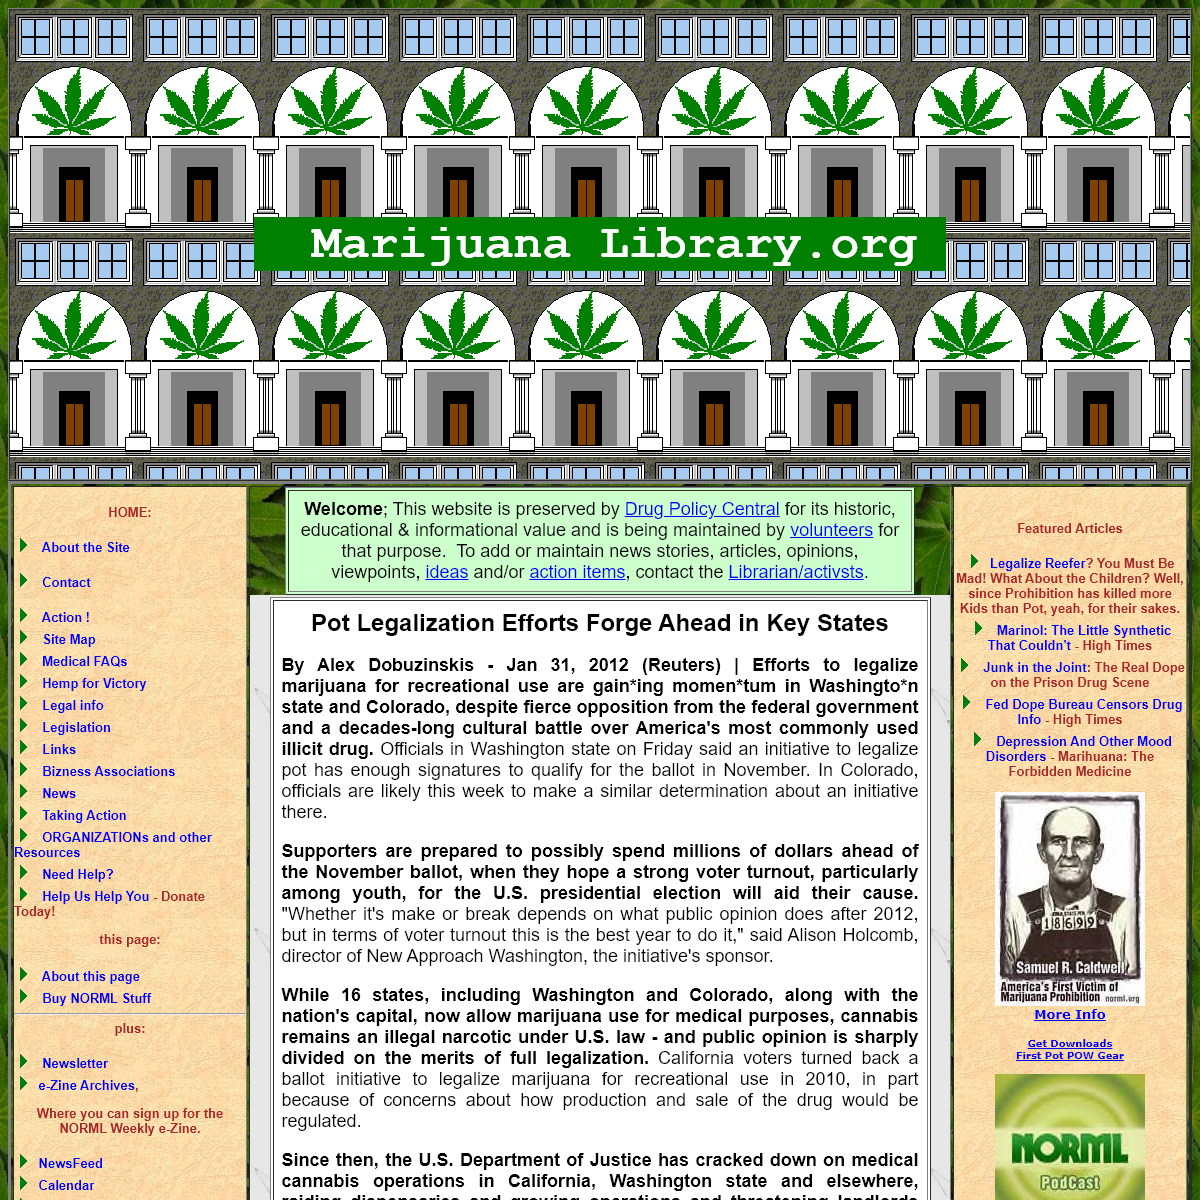 A complete backup of marijuanalibrary.org